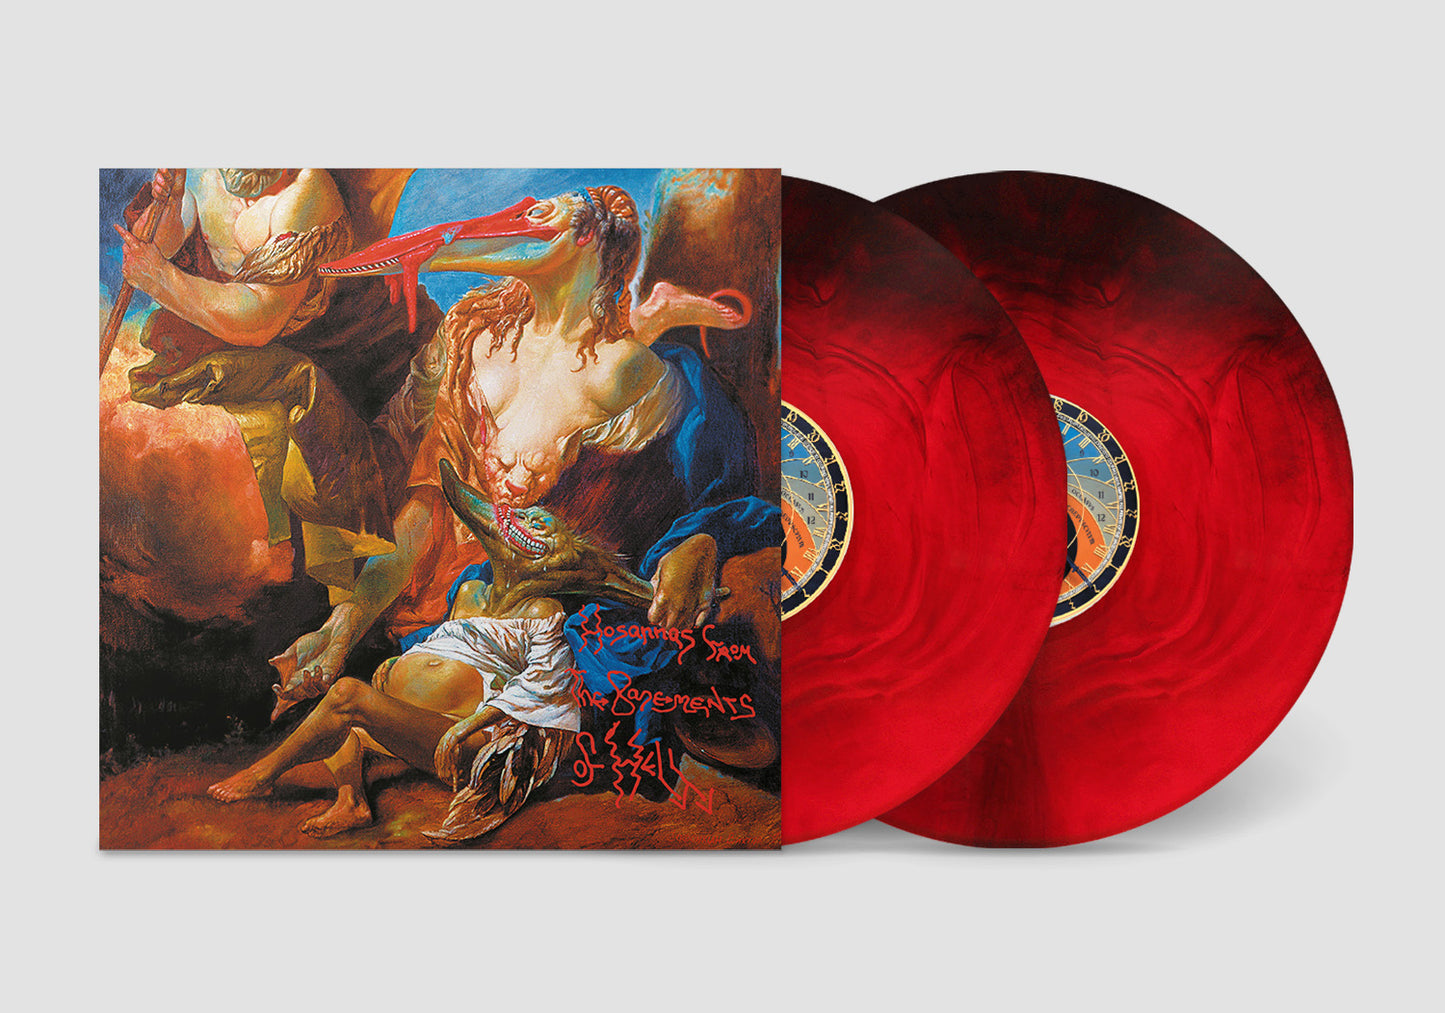 Hosannas from the Basements of Hell (Deluxe Edition, Red & Black Galaxy Colored Vinyl, Indie Exclusive) (2 Lp's)